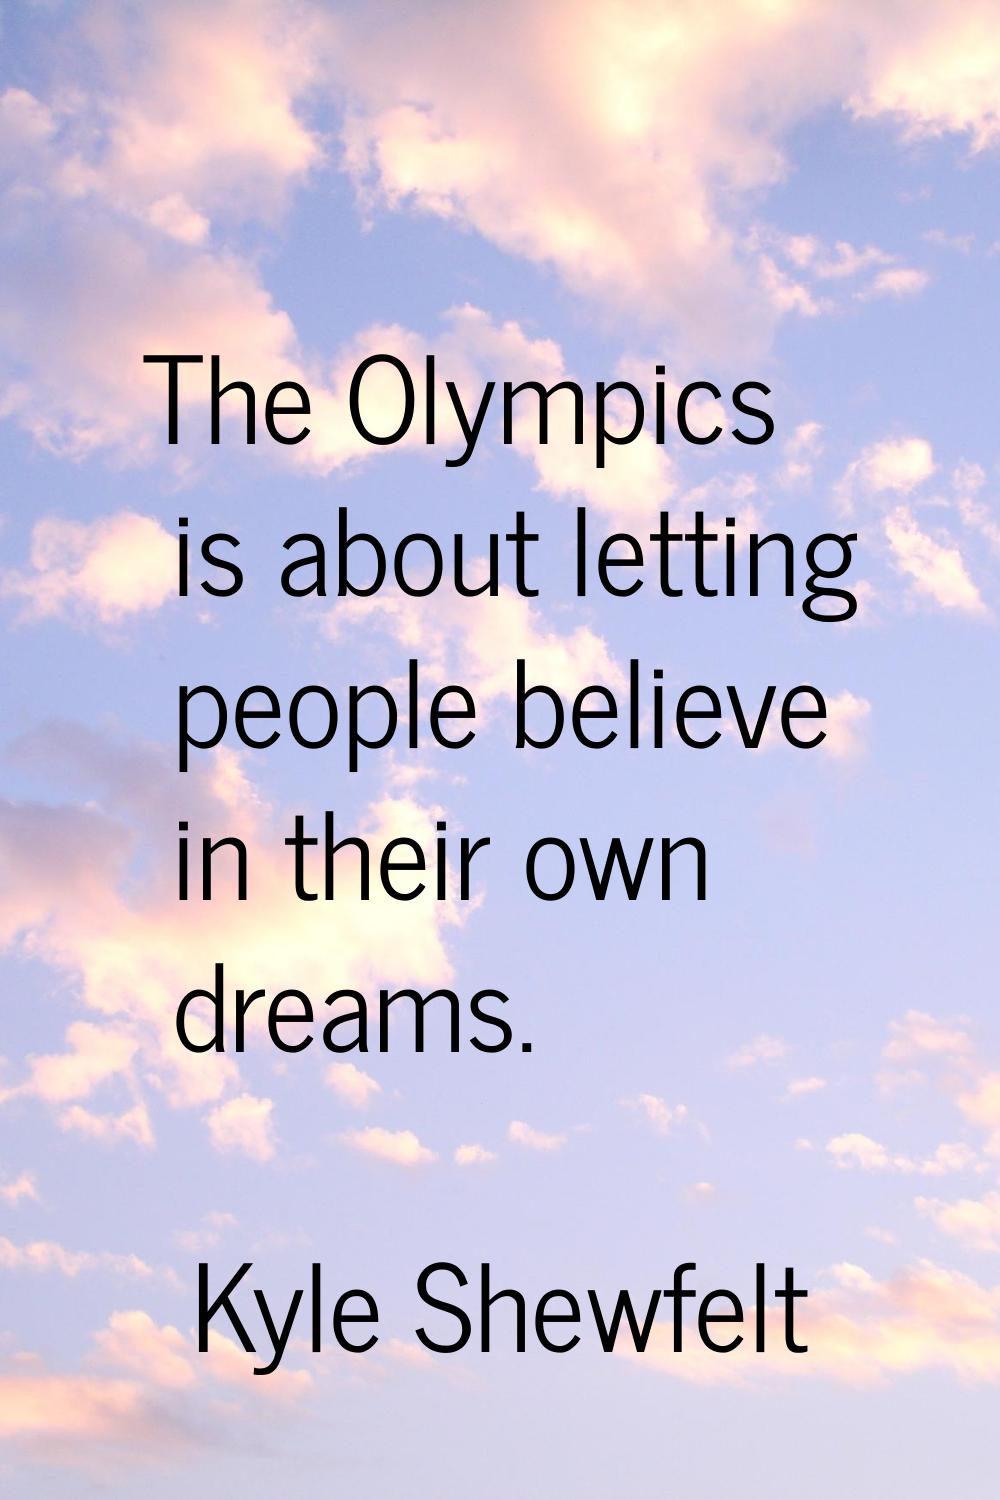 The Olympics is about letting people believe in their own dreams.